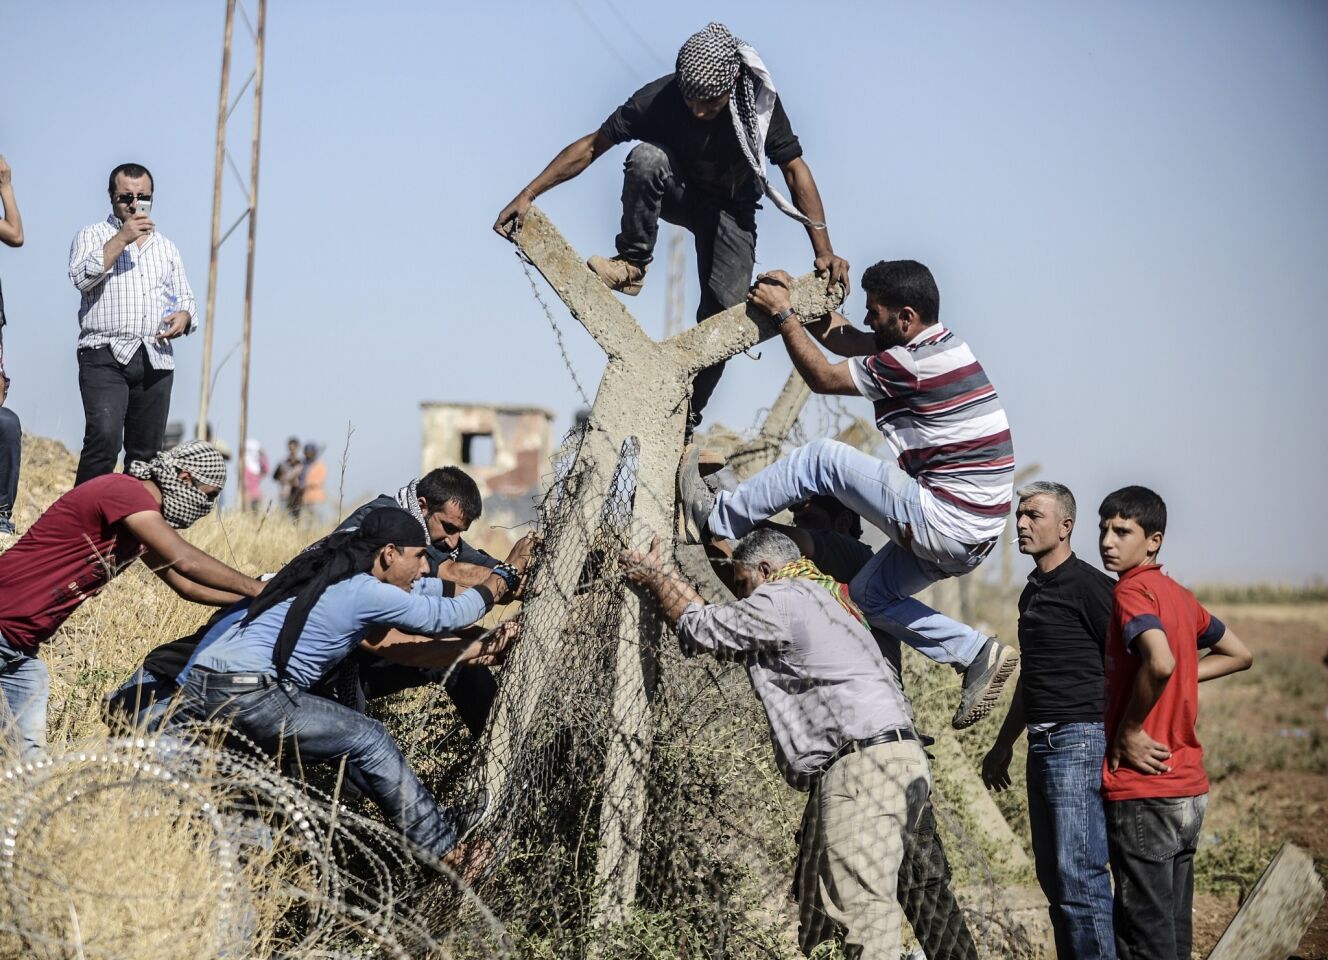 Turkish and Syrian Kurds try to tear down a border fence during protests against the extremist group Islamic State on Sept. 16. Refugees fleeing the militants have flooded into Turkey from Syria.